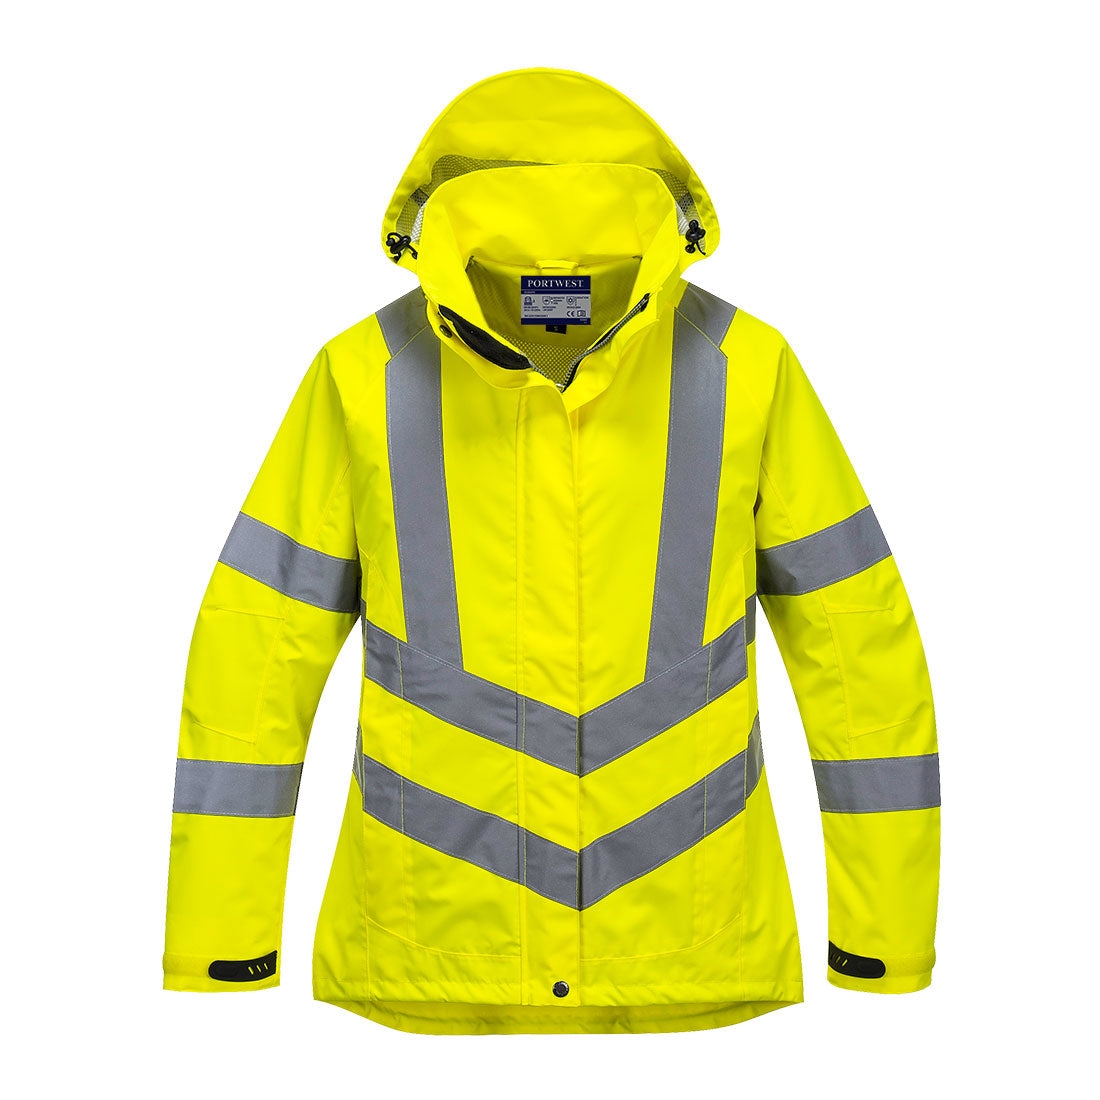 Portwest yellow high-visibility waterproof breathable ladies jacket #LW70